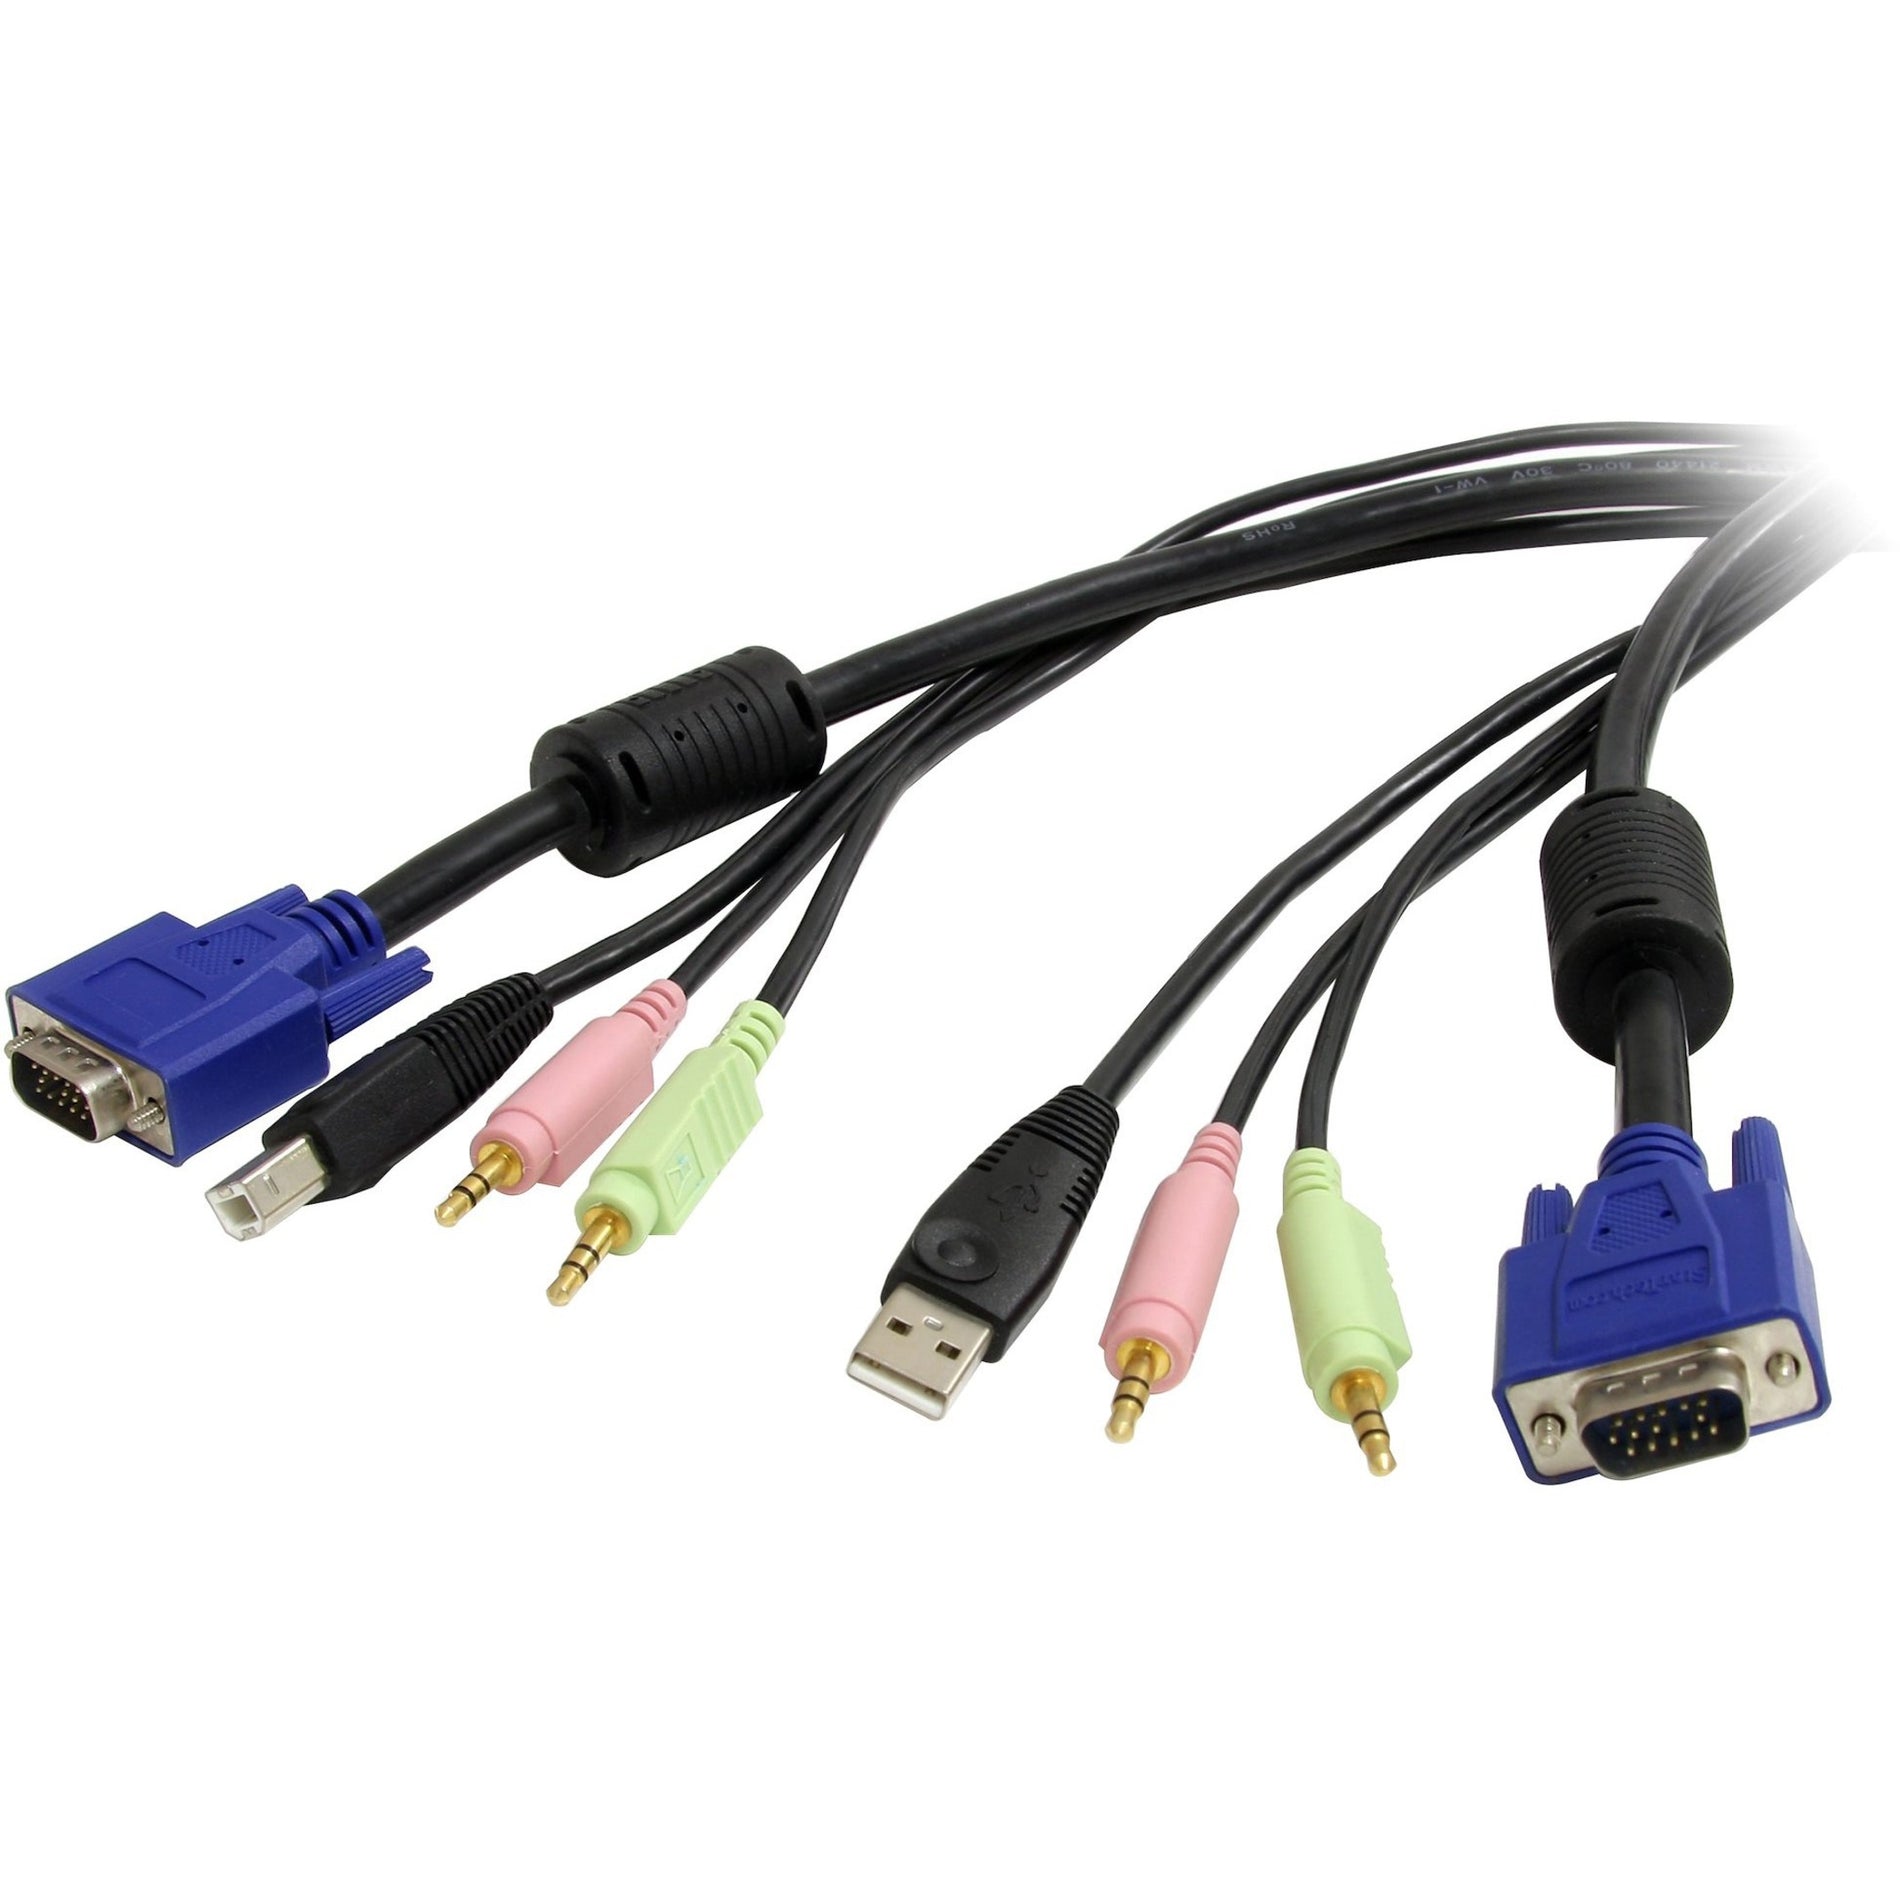 StarTech.com USBVGA4N1A6 6 ft 4-in-1 USB VGA KVM Switch Cable with Audio, Convenient and Versatile Solution for KVM Switching